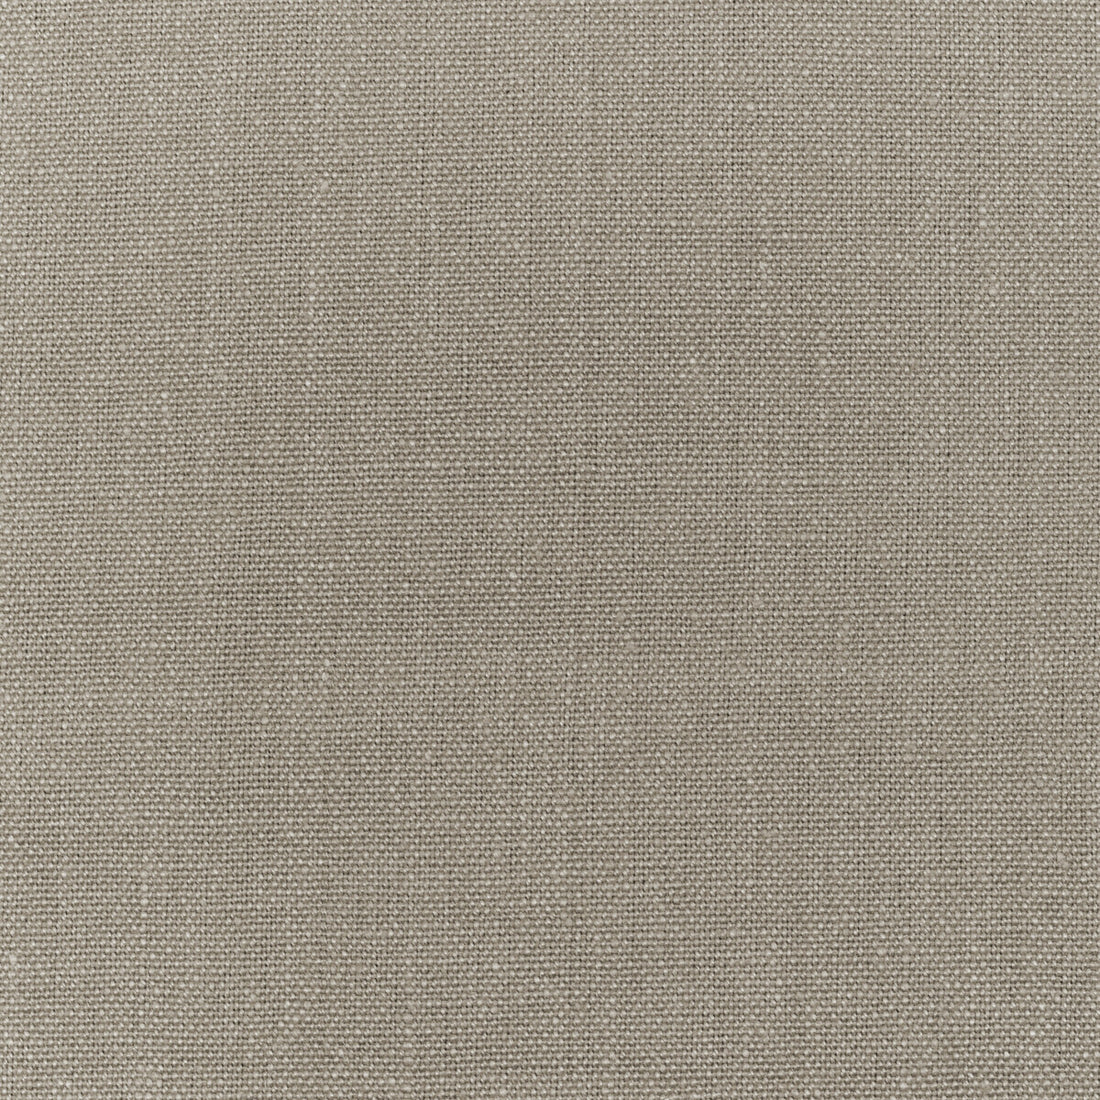 Watermill fabric in dove color - pattern 30421.11.0 - by Kravet Basics in the Perfect Plains collection